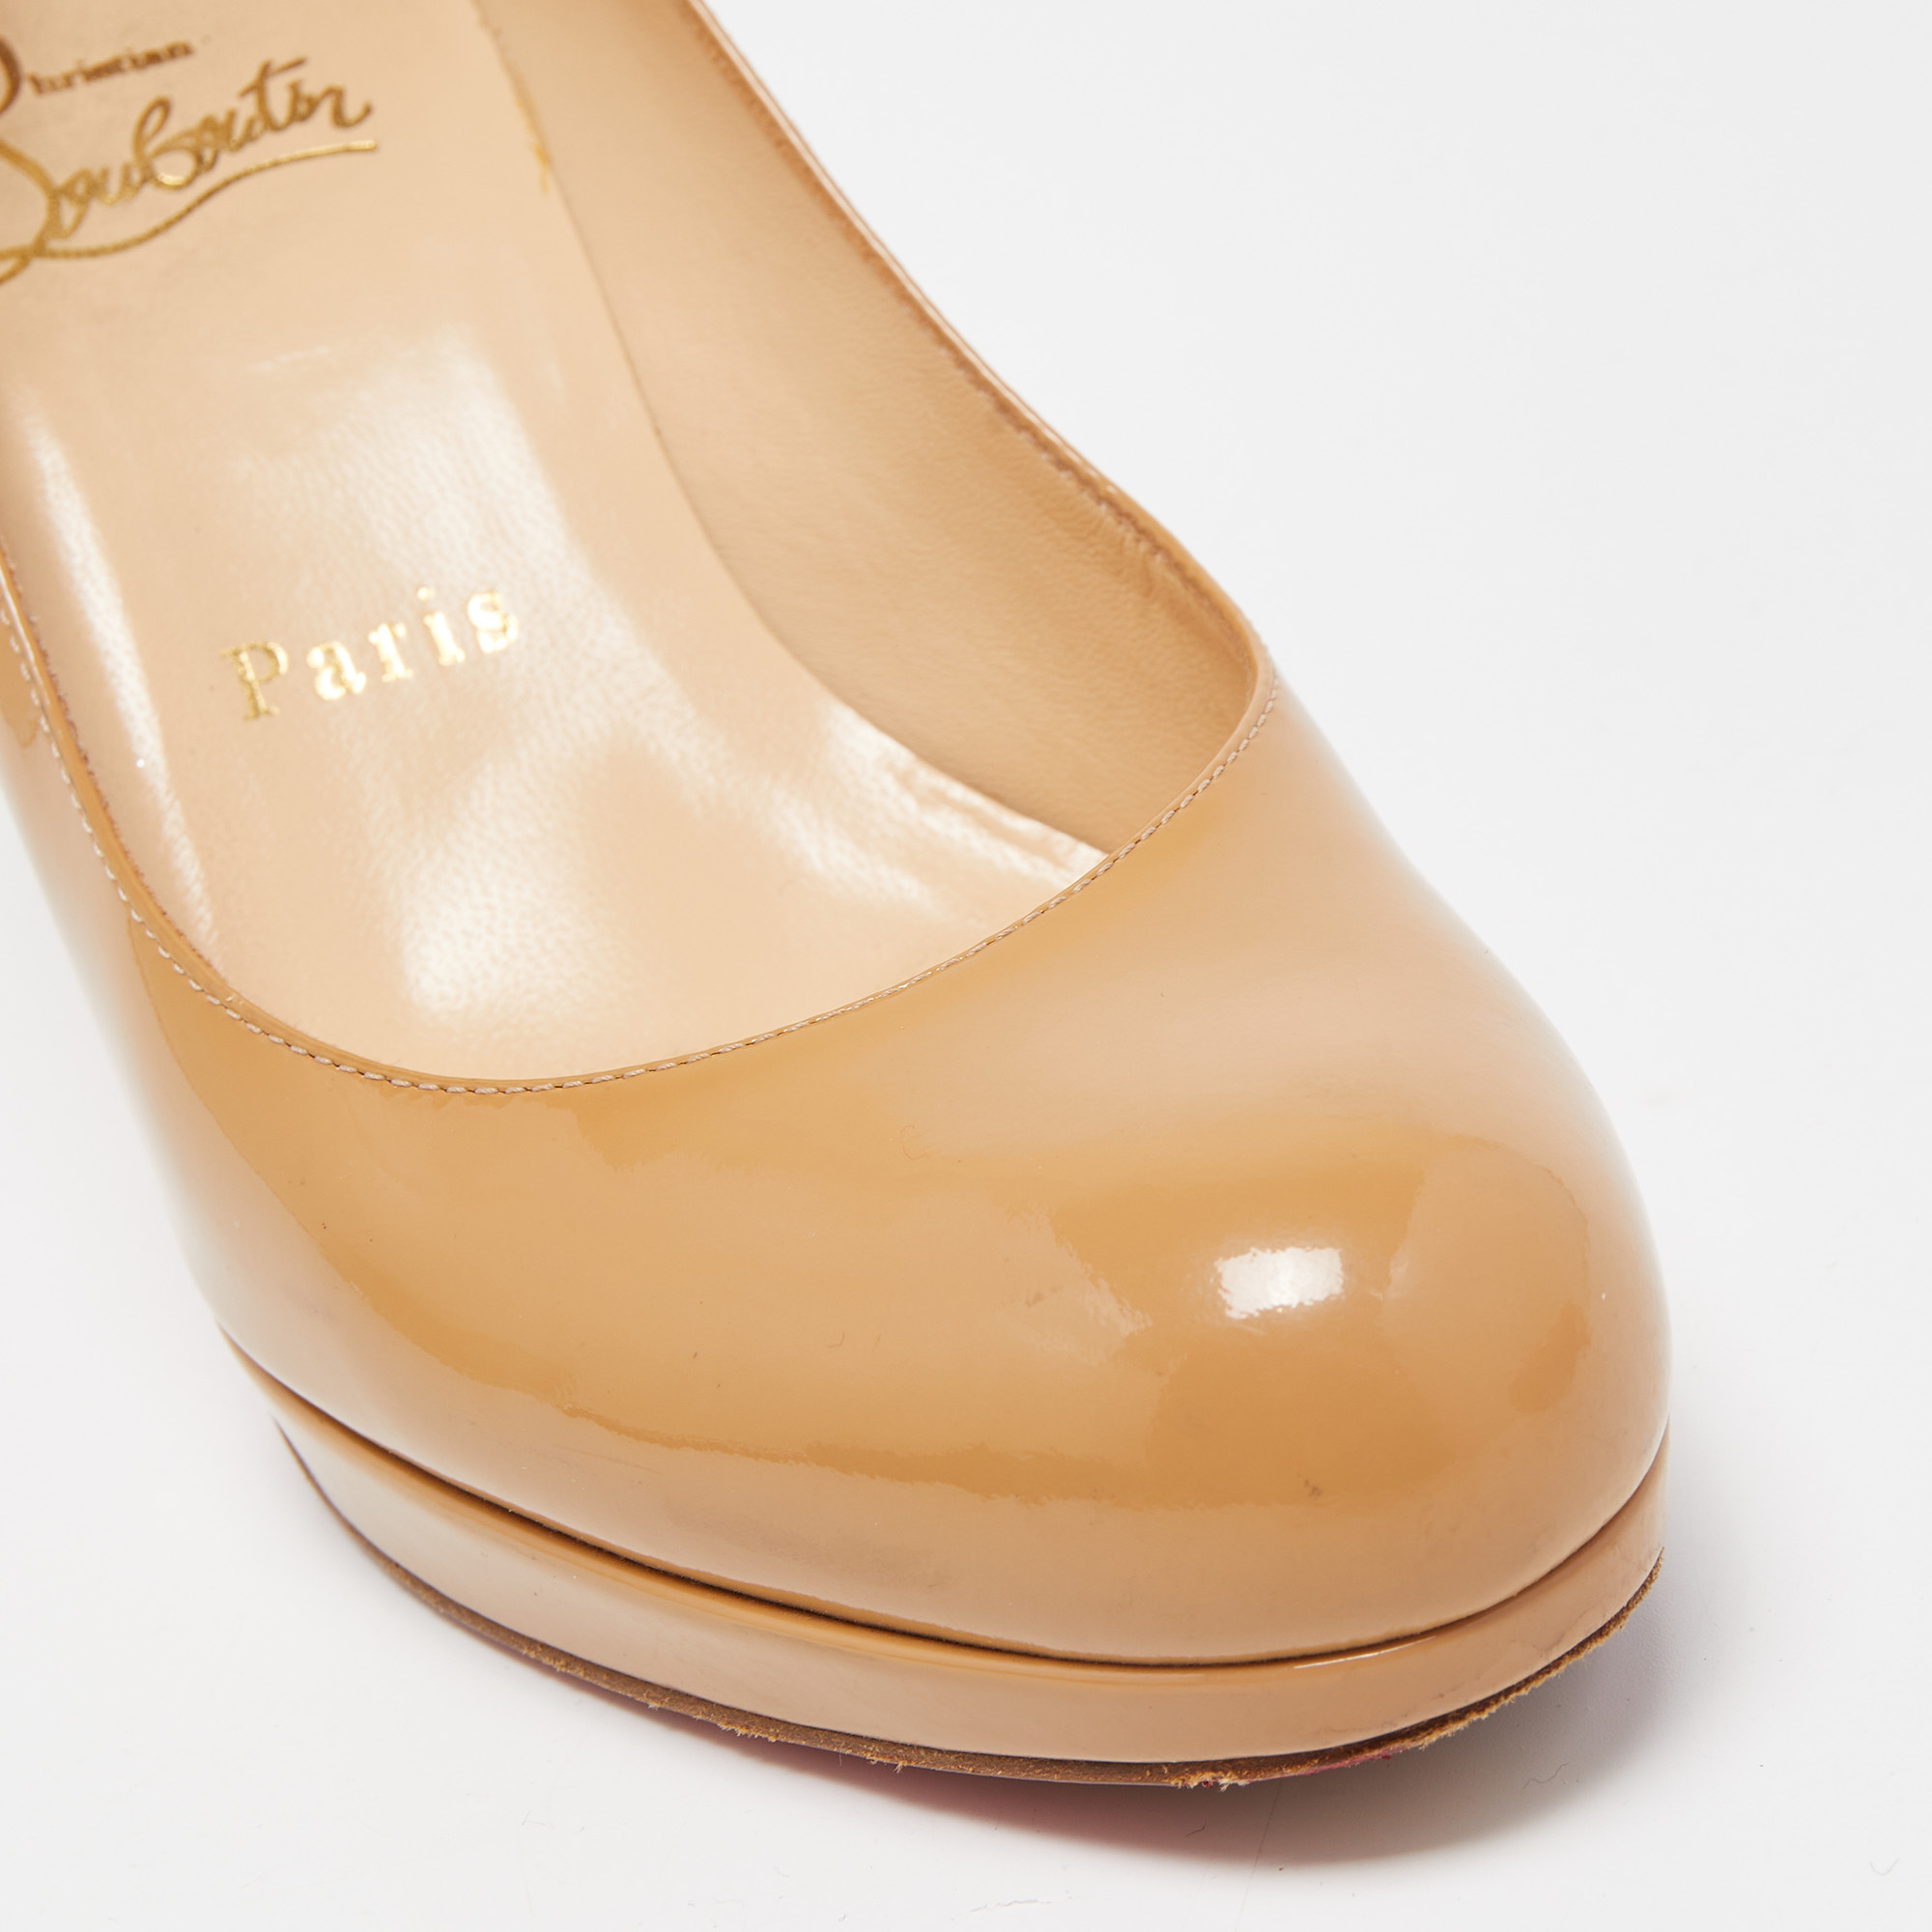 Christian Louboutin Beige Patent Leather New Simple Pumps Size 35.5